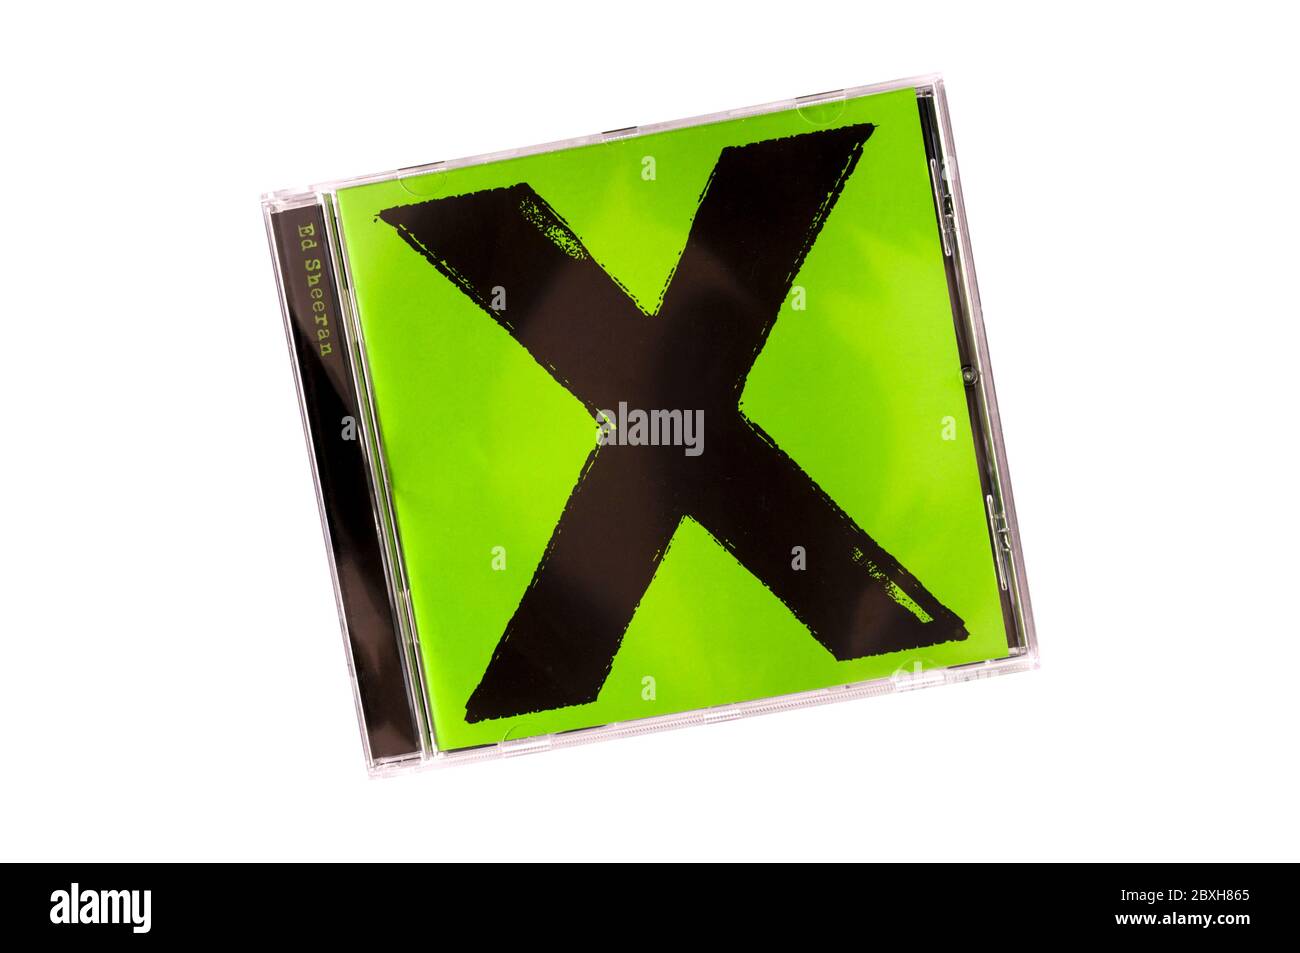 X, pronounced Multiply, by Ed Sheeran, was his second studio album. It was released in 2014. Stock Photo